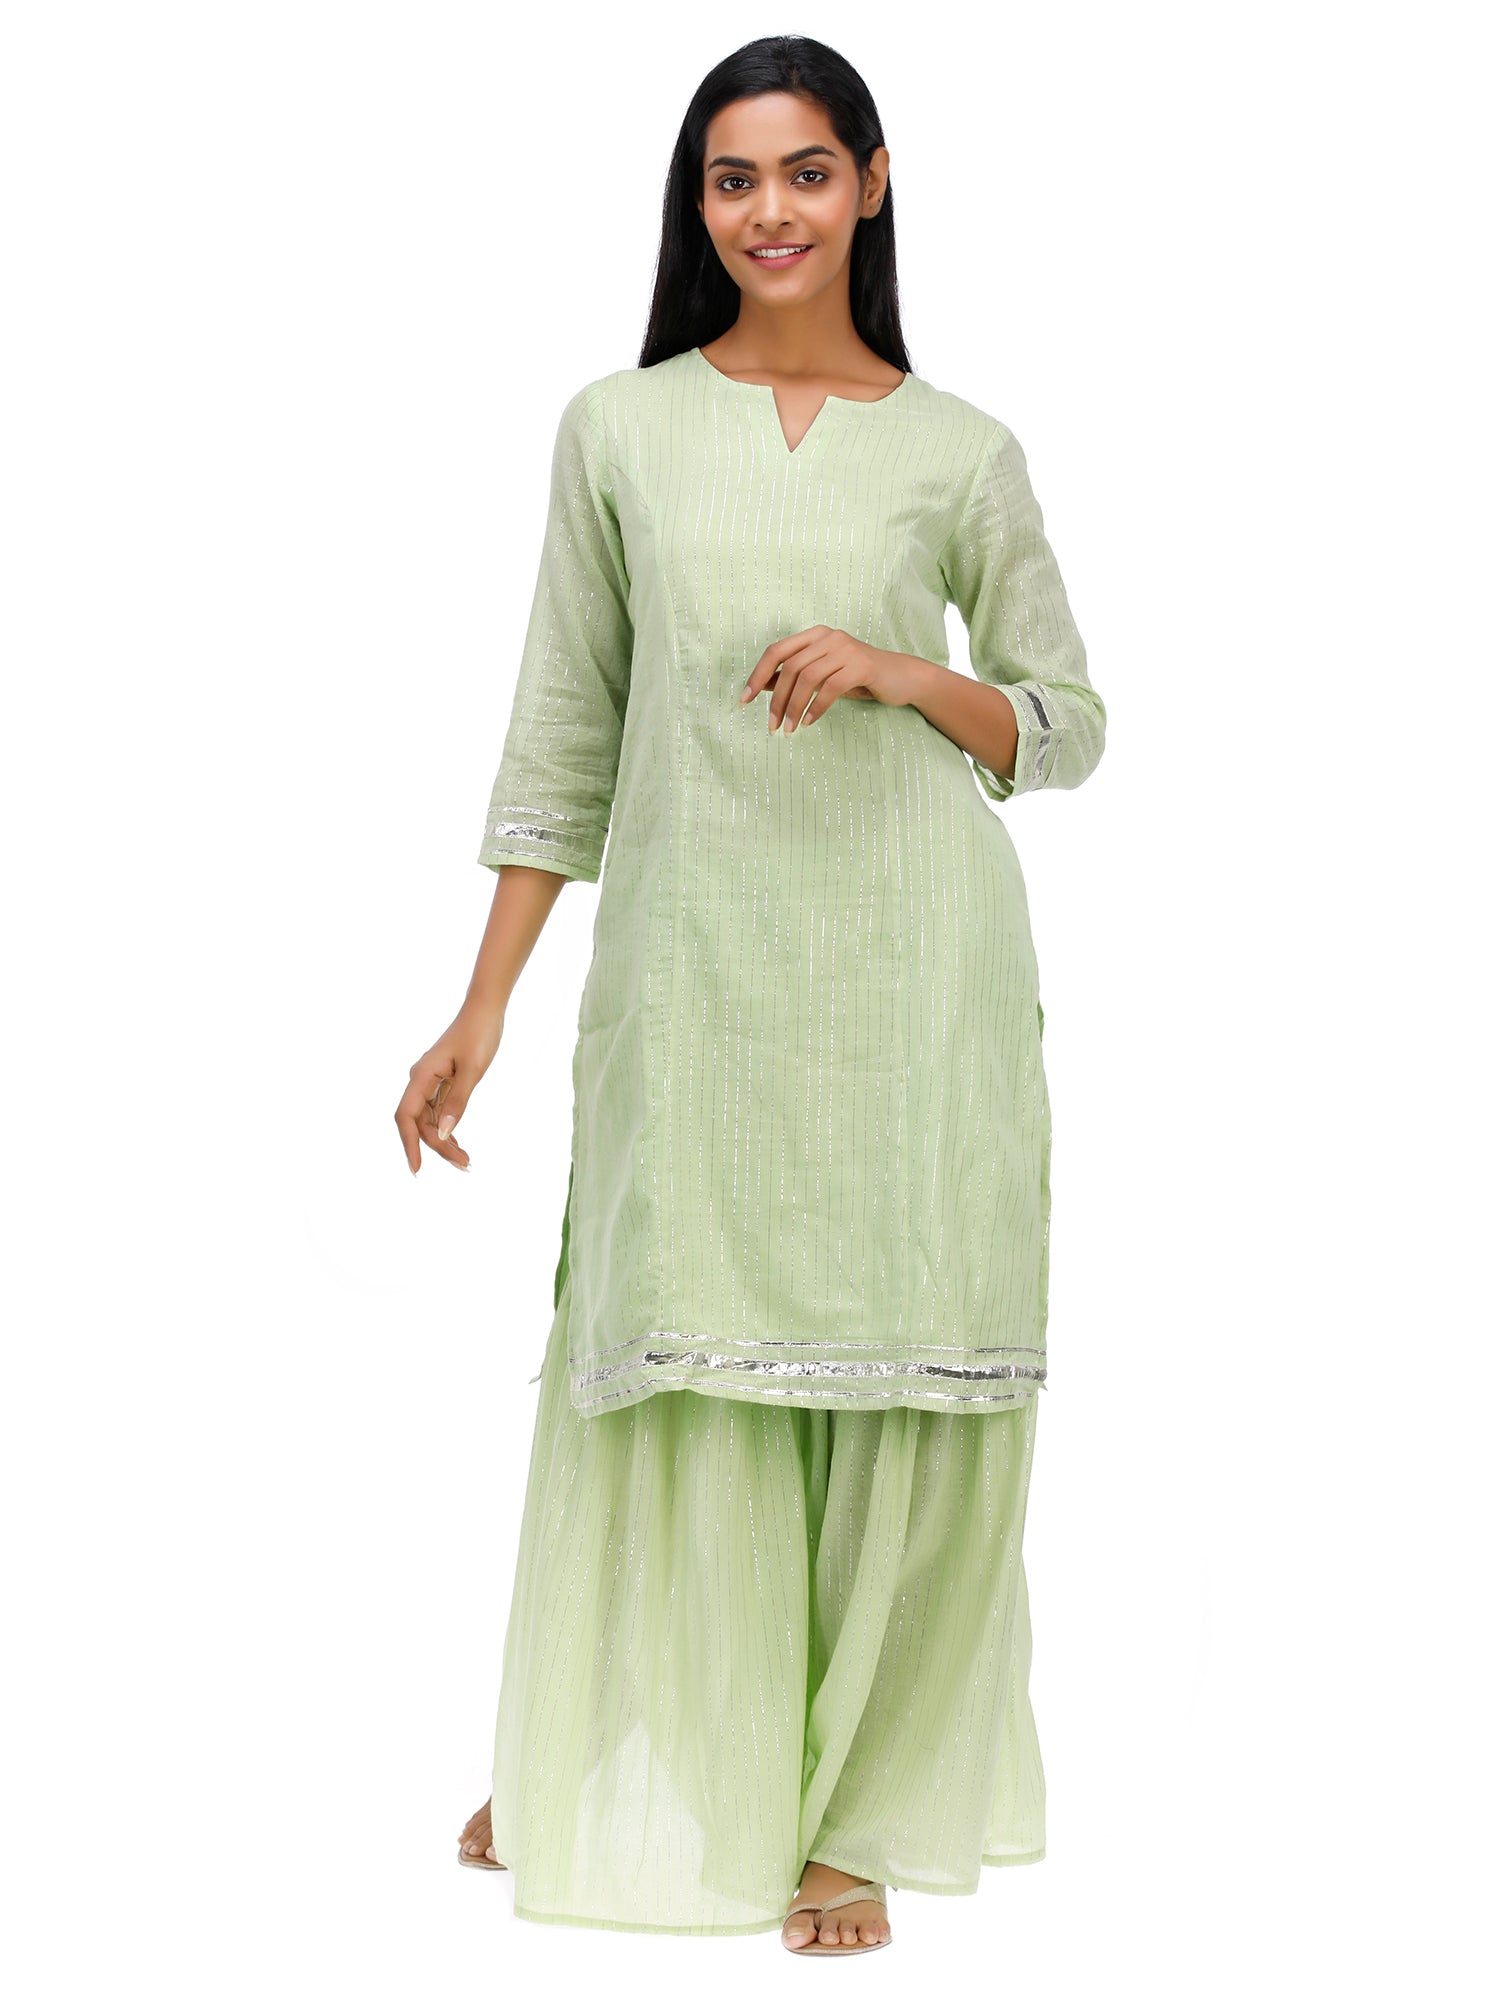 Buy Handpainted Kurti Palazzo Set by KOHSH at Ogaan Market Online Shopping  Site